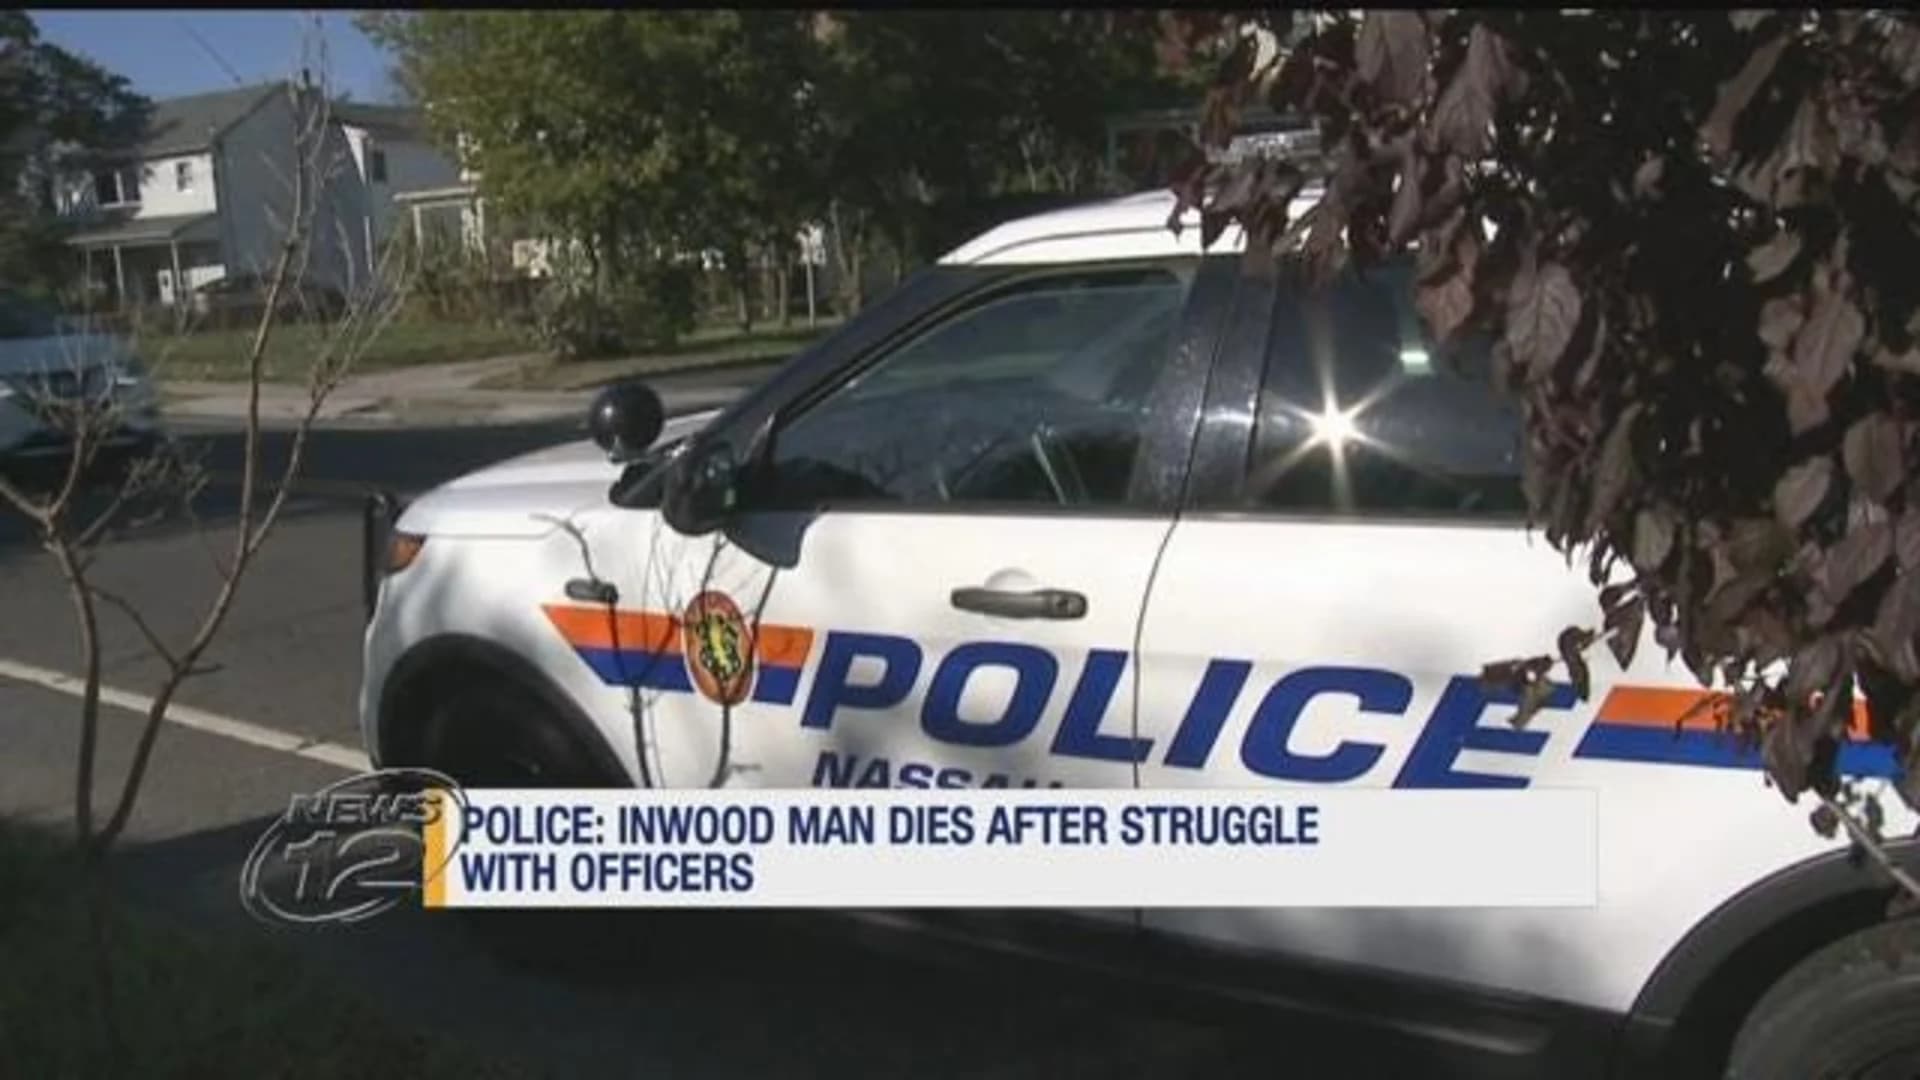 Police: Inwood man dies after struggling with officers